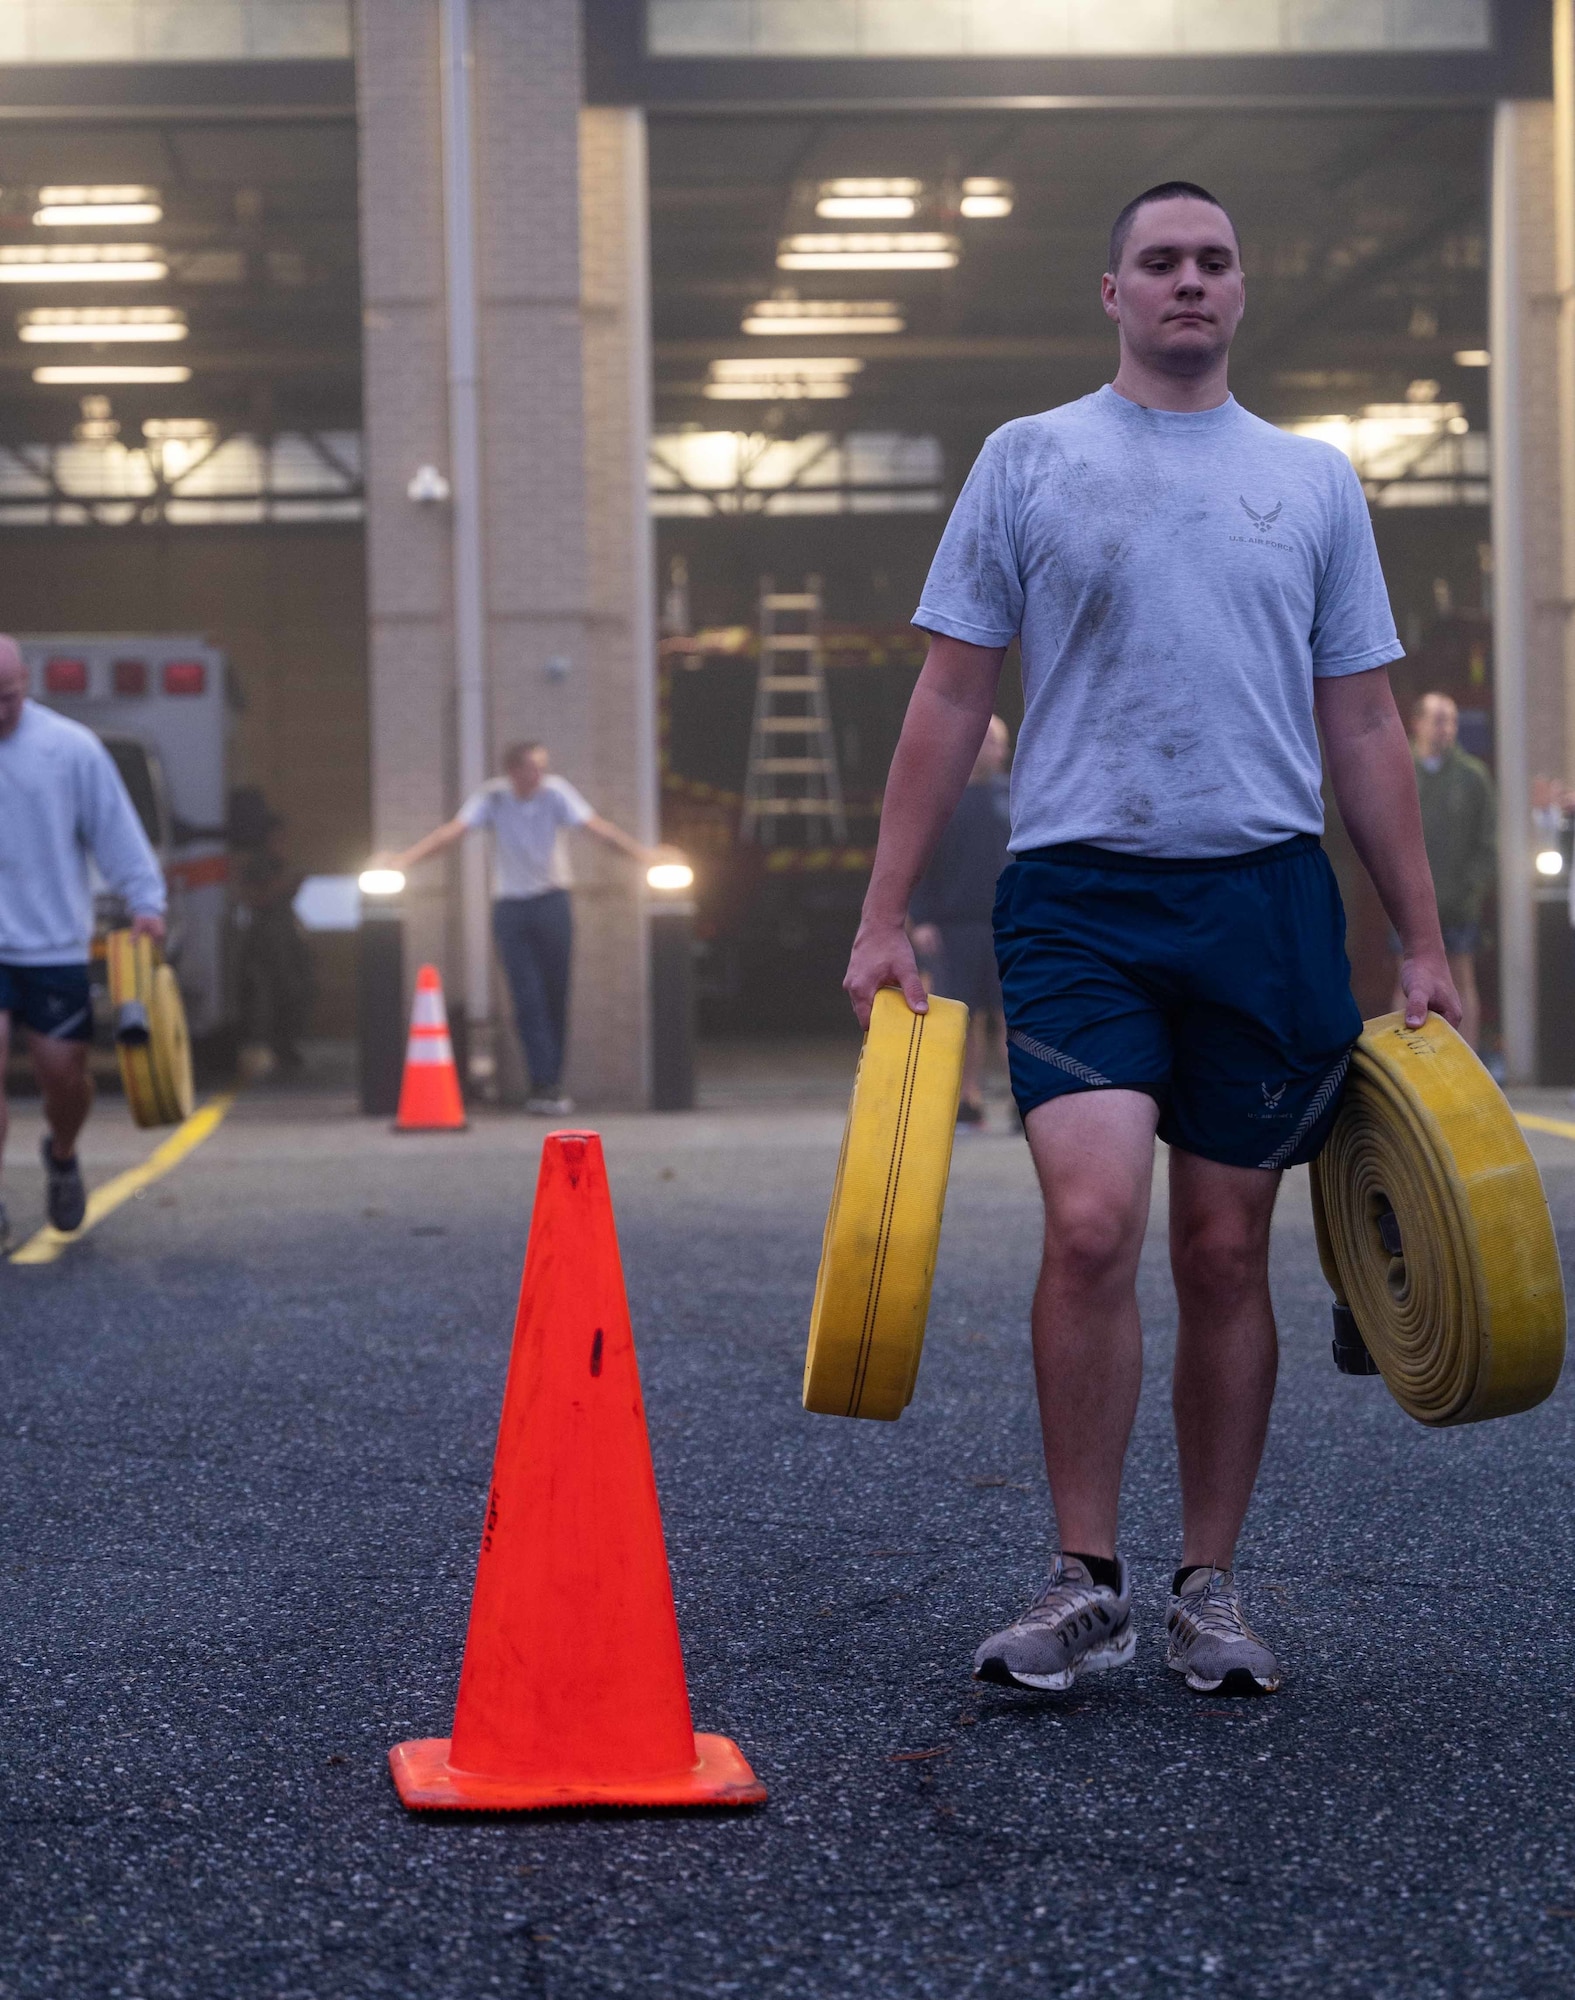 Senior Airman Carter Aldrich, 436th Civil Engineer Squadron structural journeyman, performs farmer carries during a physical training session at the firehouse on Dover Air Force Base, Delaware, Oct. 14, 2021. The Dover AFB fire department hosted a firefighter centric workout for squadron members that featured farmer carries, hose drags and ladder climbs, as part of Fire Prevention Week 2021. (U.S. Air Force photo by Senior Airman Faith Schaefer)